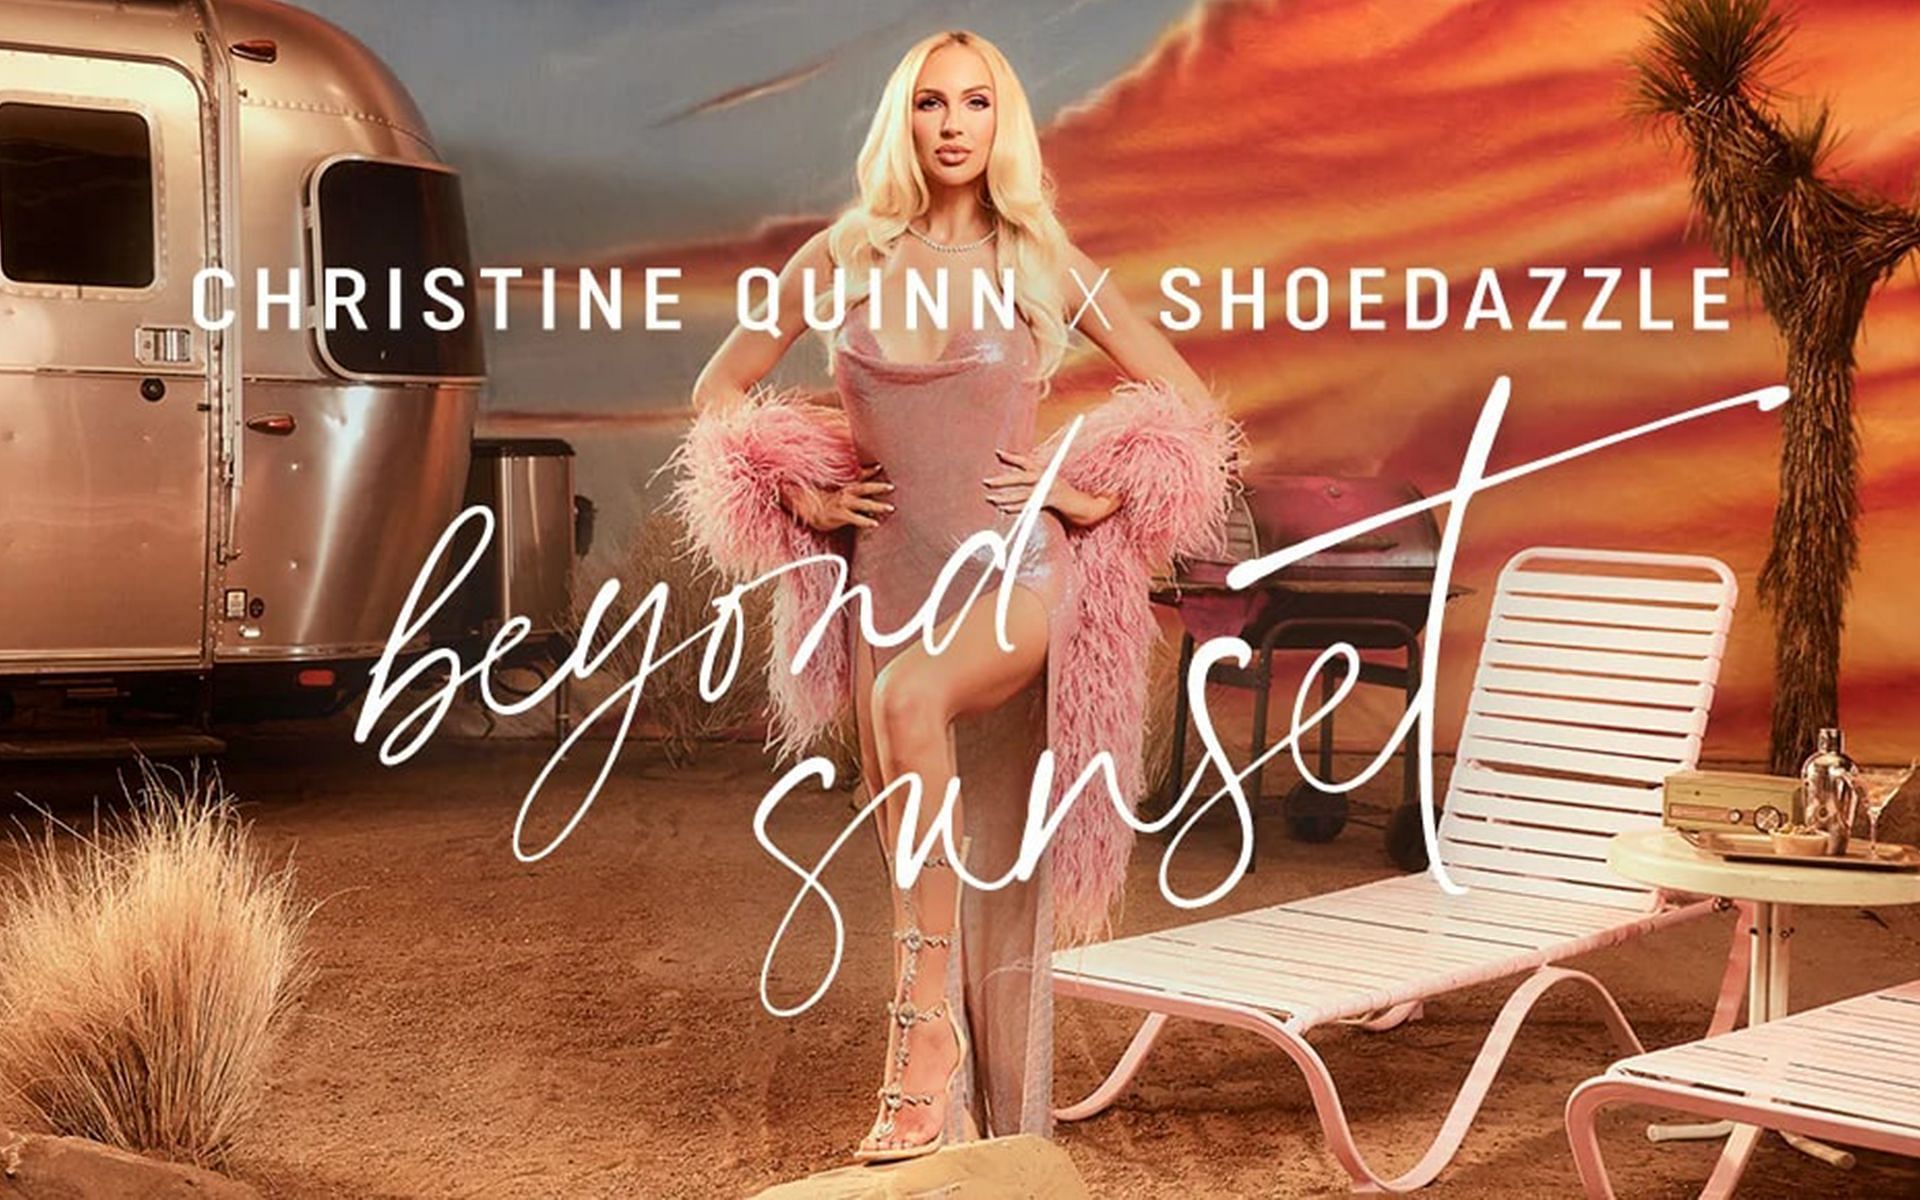 Selling Sunset' Star Christine Quinn Drops Dazzling Shoe Collaboration